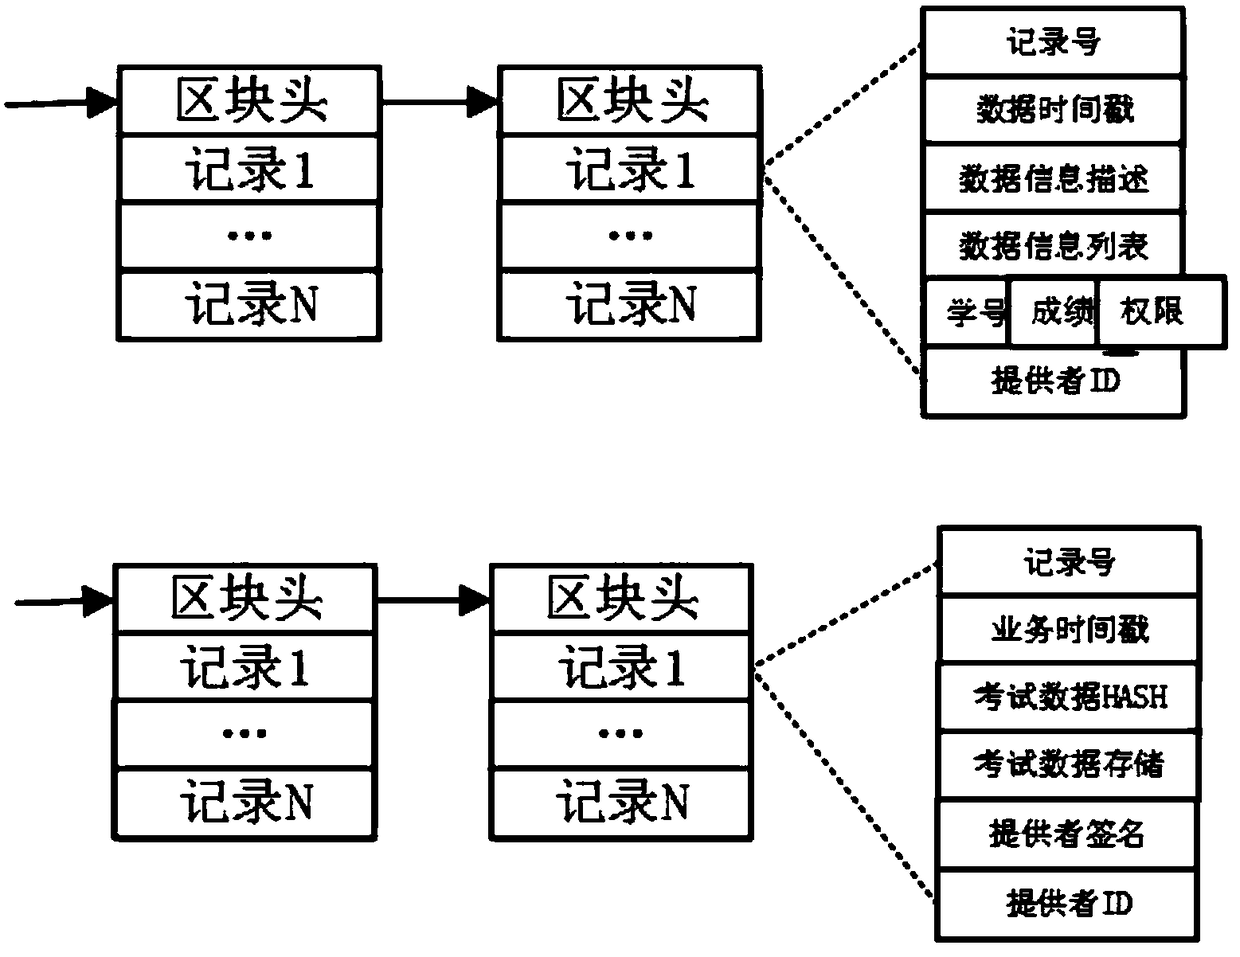 A network examination system based on a block chain and a method for managing the network examination by using the network examination system